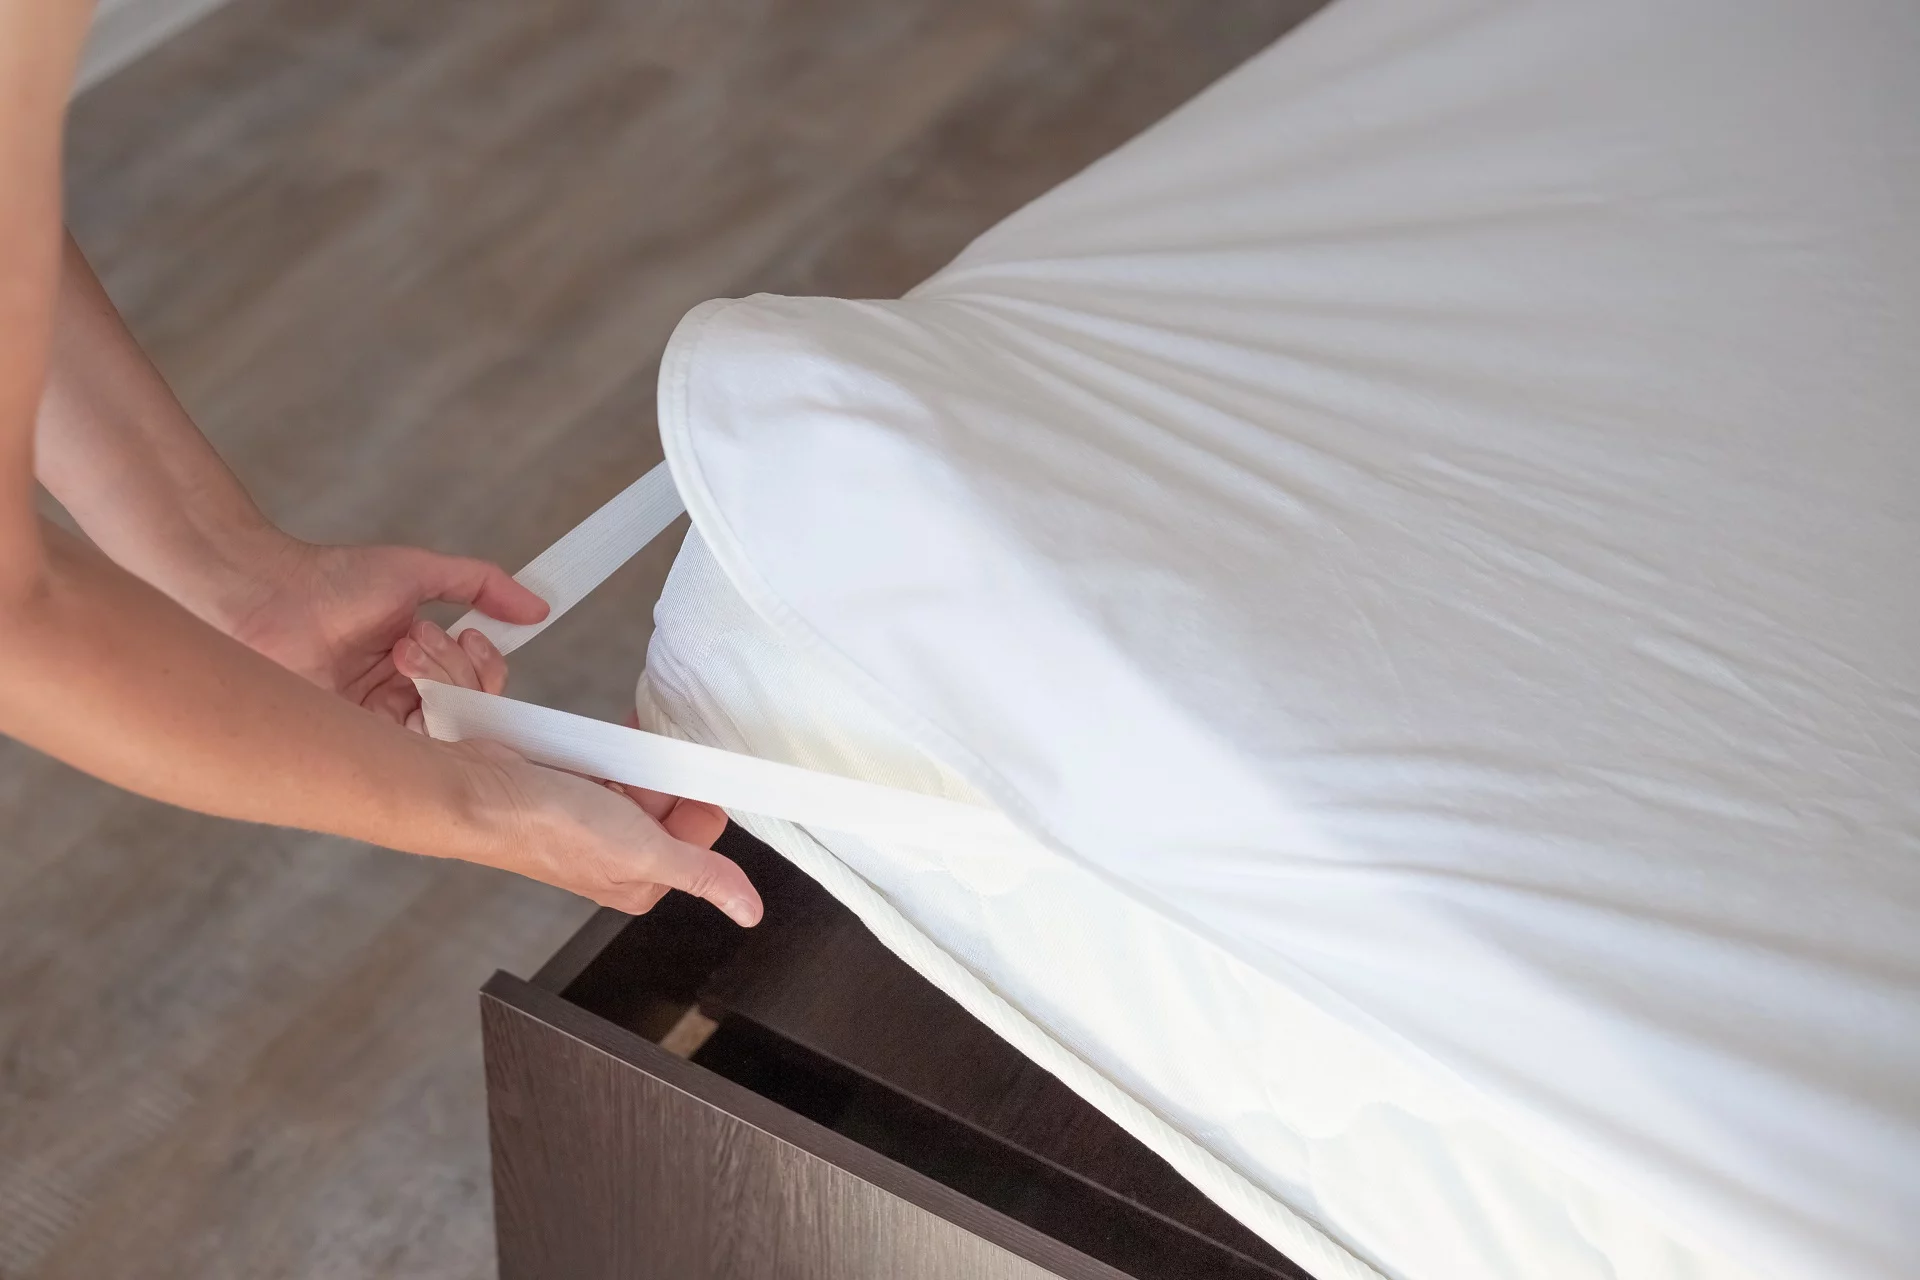 6 Important Things You Need to Know Before Buying a New Mattress